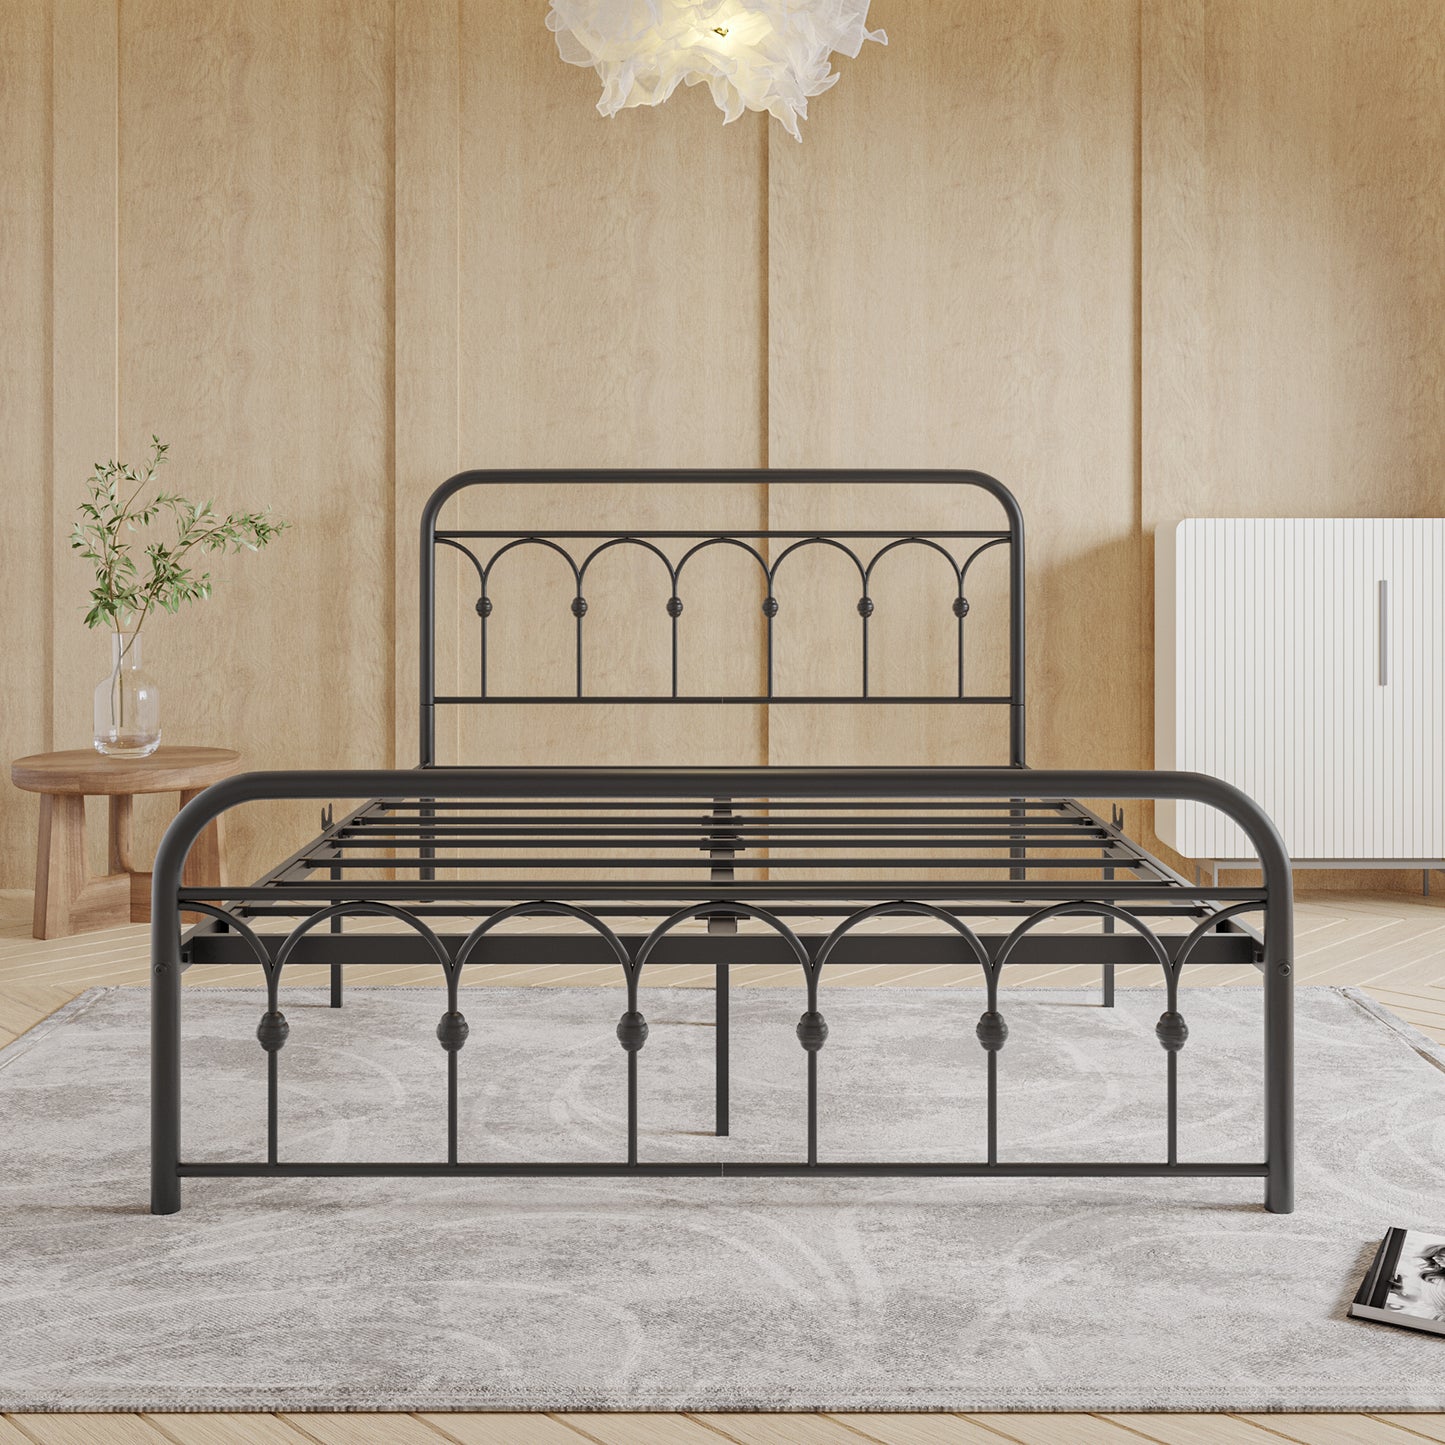 Queen Metal Bed Frame with Headboard and Footboard Platform Queen Size No Box Spring Needed 12.4" Under Bed Storage, Queen Size Black